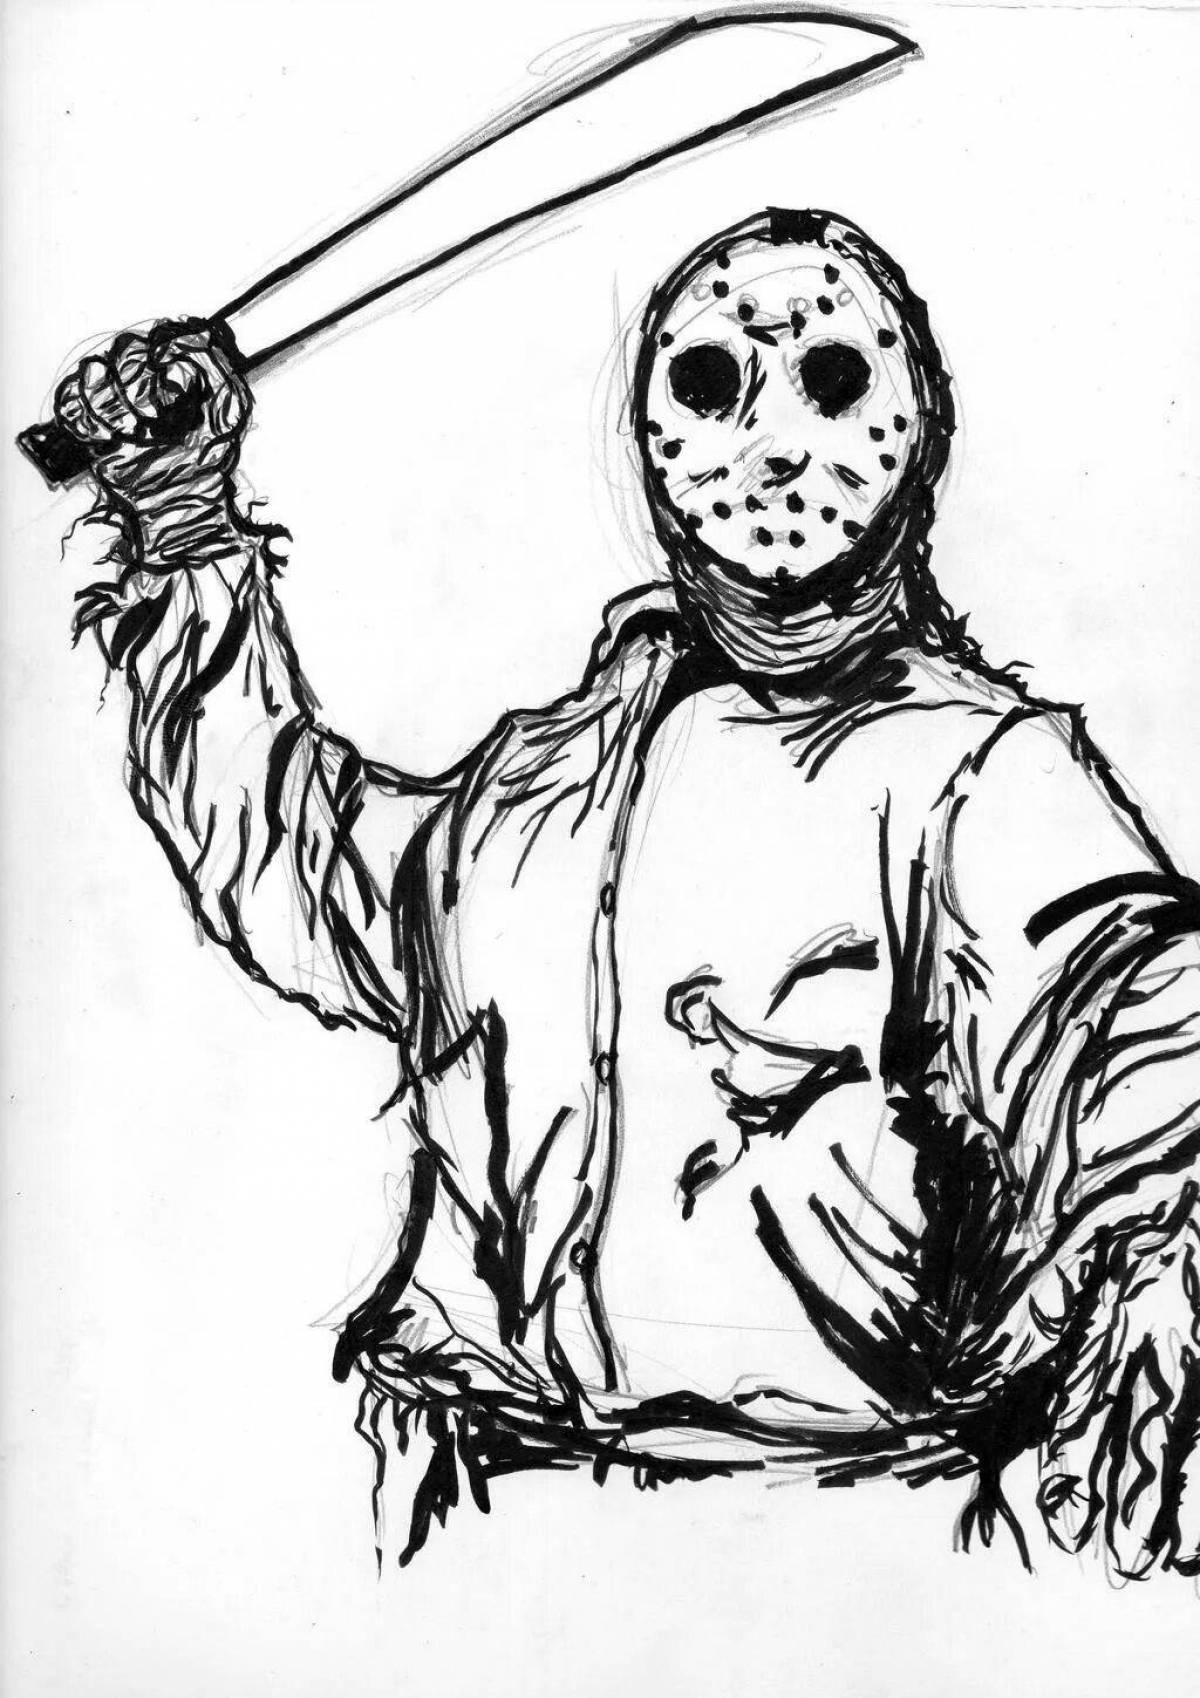 Heinous Friday the 13th coloring book